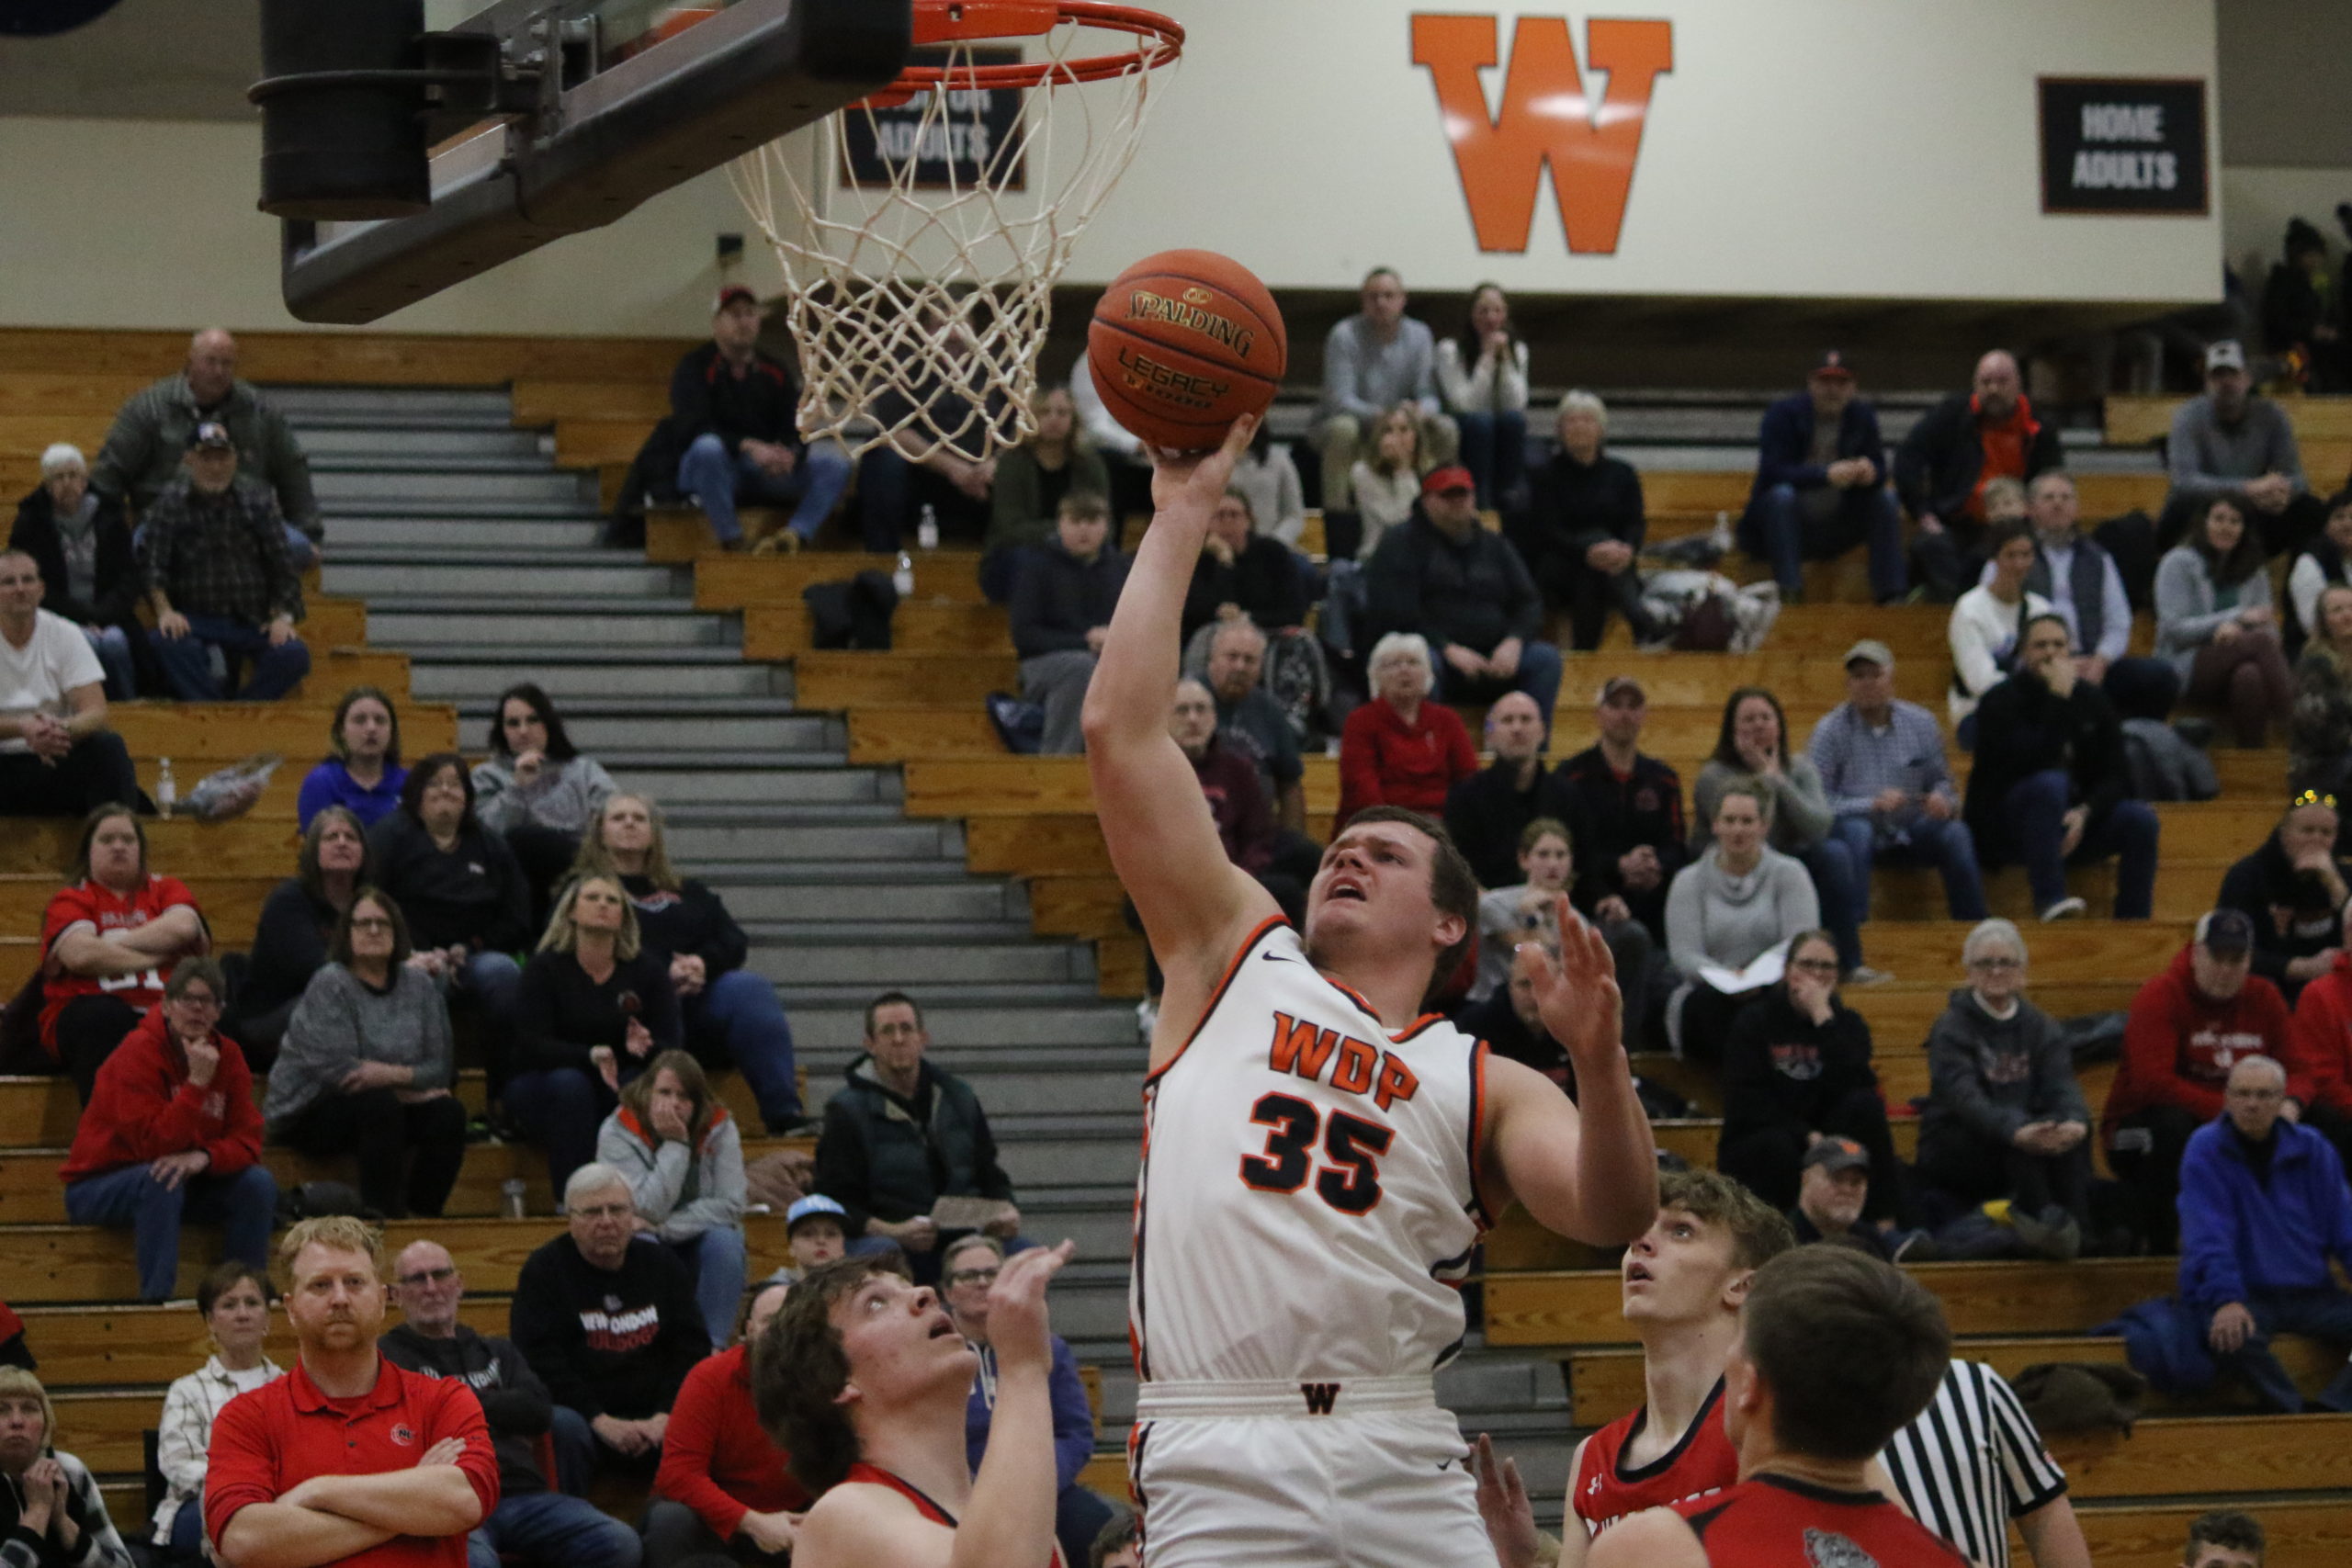 WDP comes back to beat New London